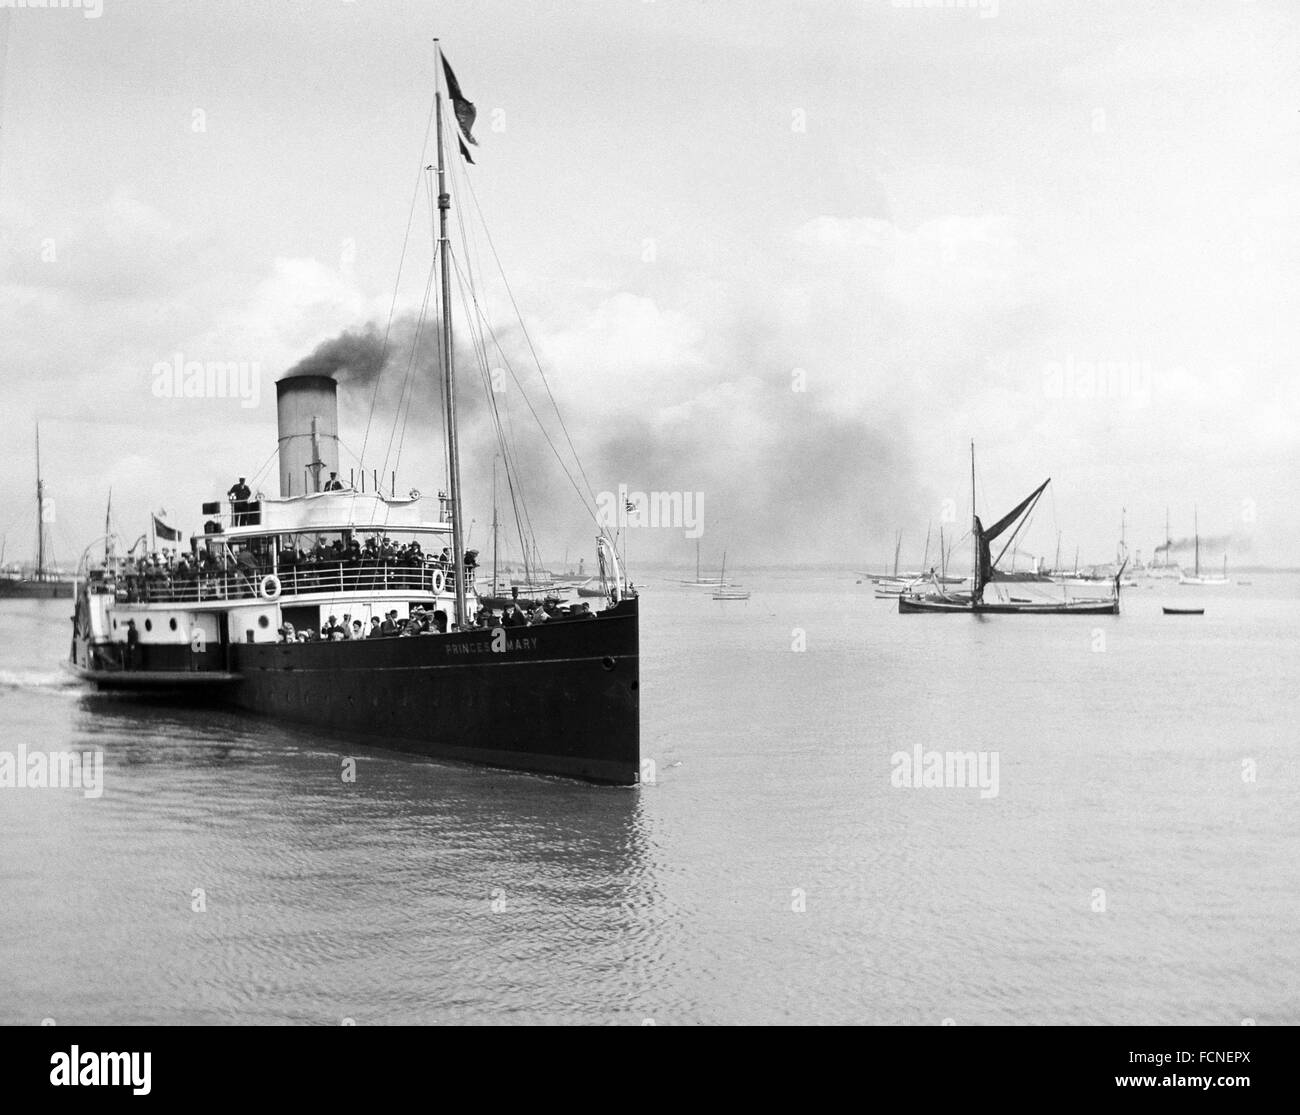 AJAXNETPHOTO. 1911-1914 (APPROX), SOUTHSEA, ENGLAND. - EXCURSION STEAMER - RED FUNNEL PADDLE STEAMER PROBABLY PREPARING TO BERTH AT CLARENCE PIER AFTER A SOLENT ROUND TRIP IN PRE WWI YEARS. SHIP WAS REQUISITIONED BY THE ROYAL NAVY AND USED AS A MINESWEEPER IN THE MEDITERRANEAN SEA BEFORE BEING SUNK IN AUGUST 1919 AFTER HITTING THE WRECK OF HMS MAJESTIC.  PHOTO:AJAX VINTAGE PICTURE LIBRARY  REF:AVL SHI PRINCESS MARY 1911 14 Stock Photo